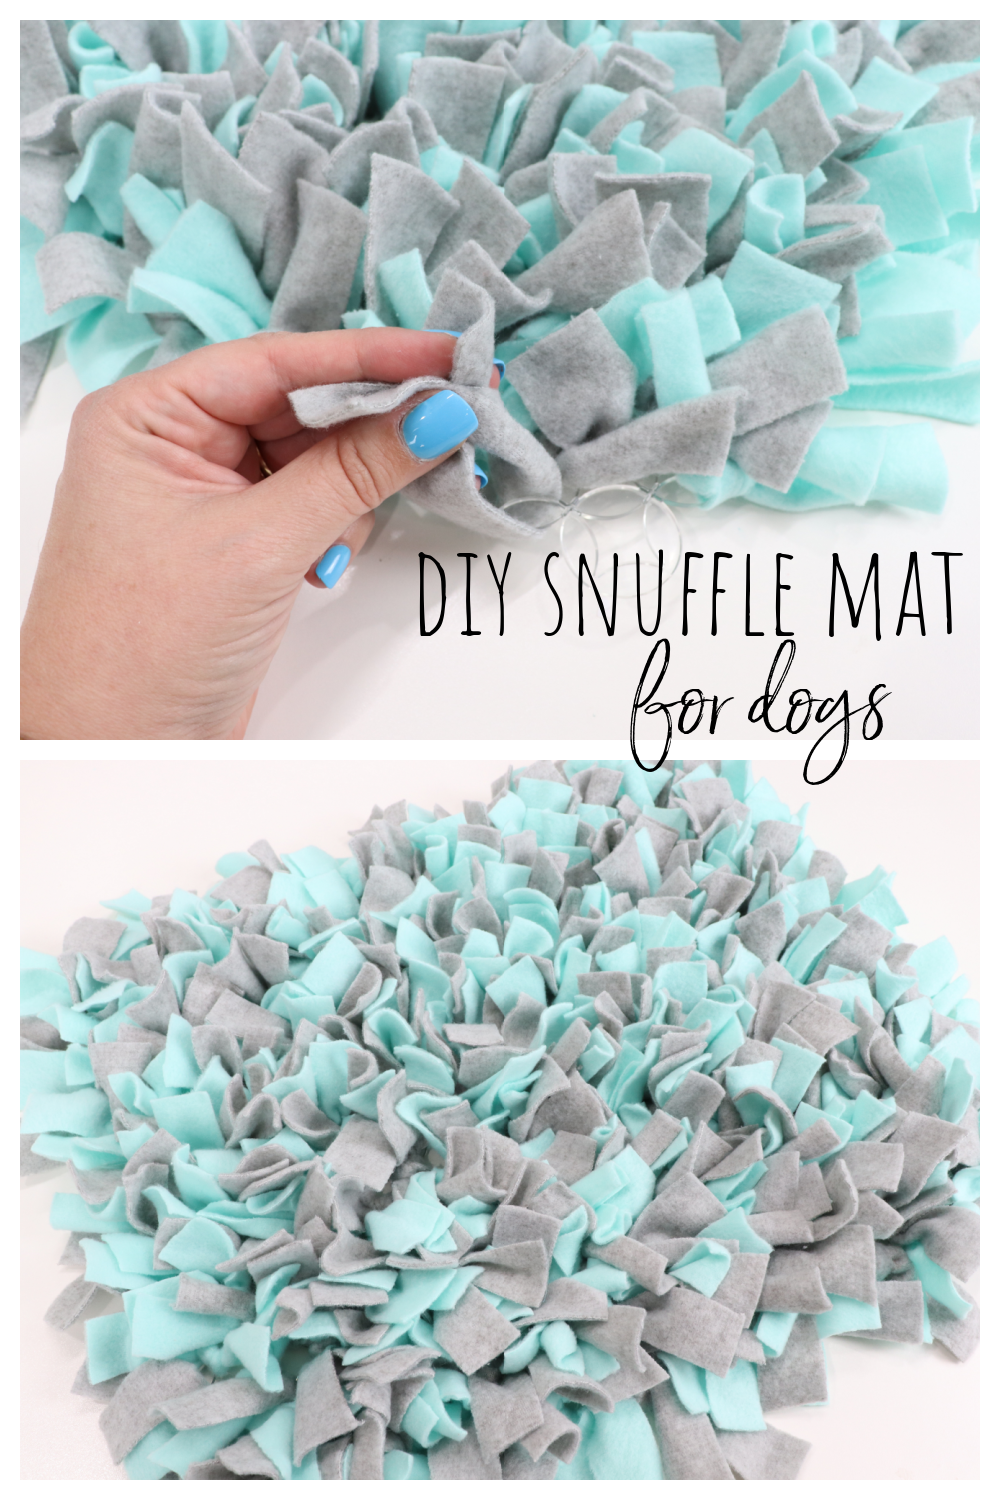 Image is a collage of images of the Snuffle Mat for Pinterest.